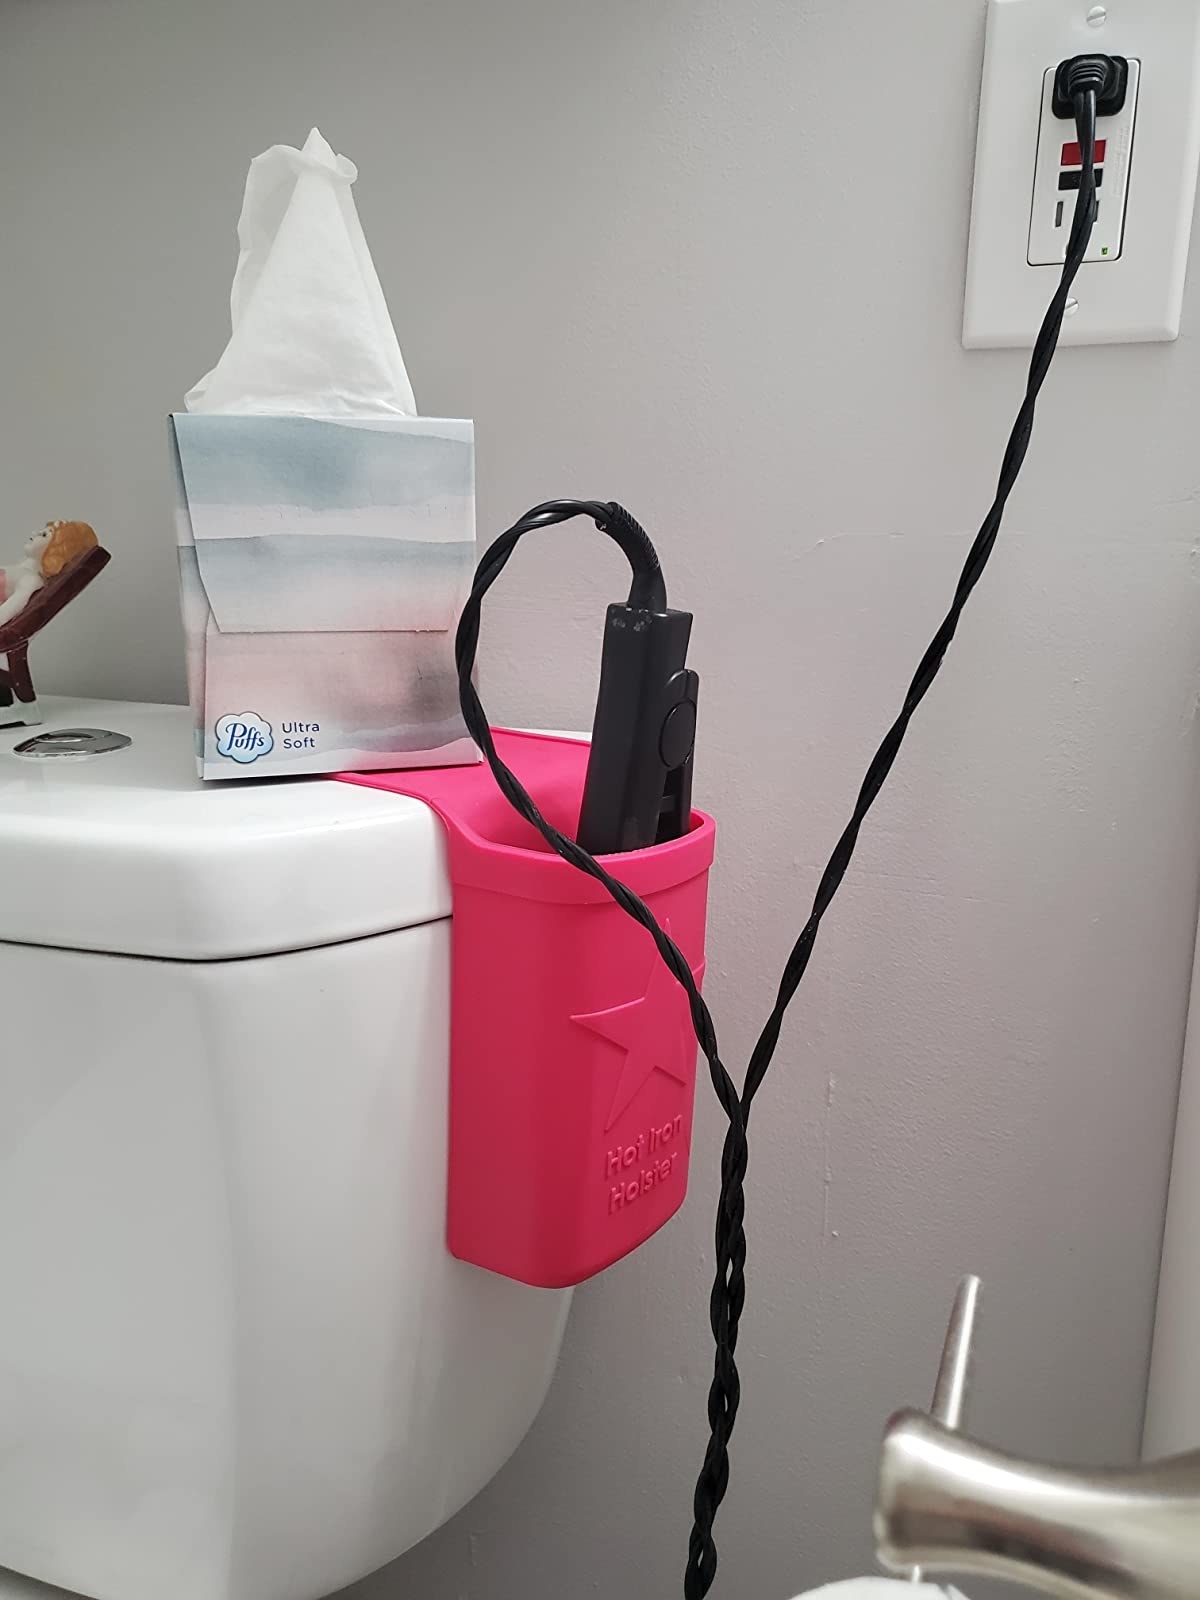 reviewer showing a pink hot iron holder holding a flat iron that's plugged in